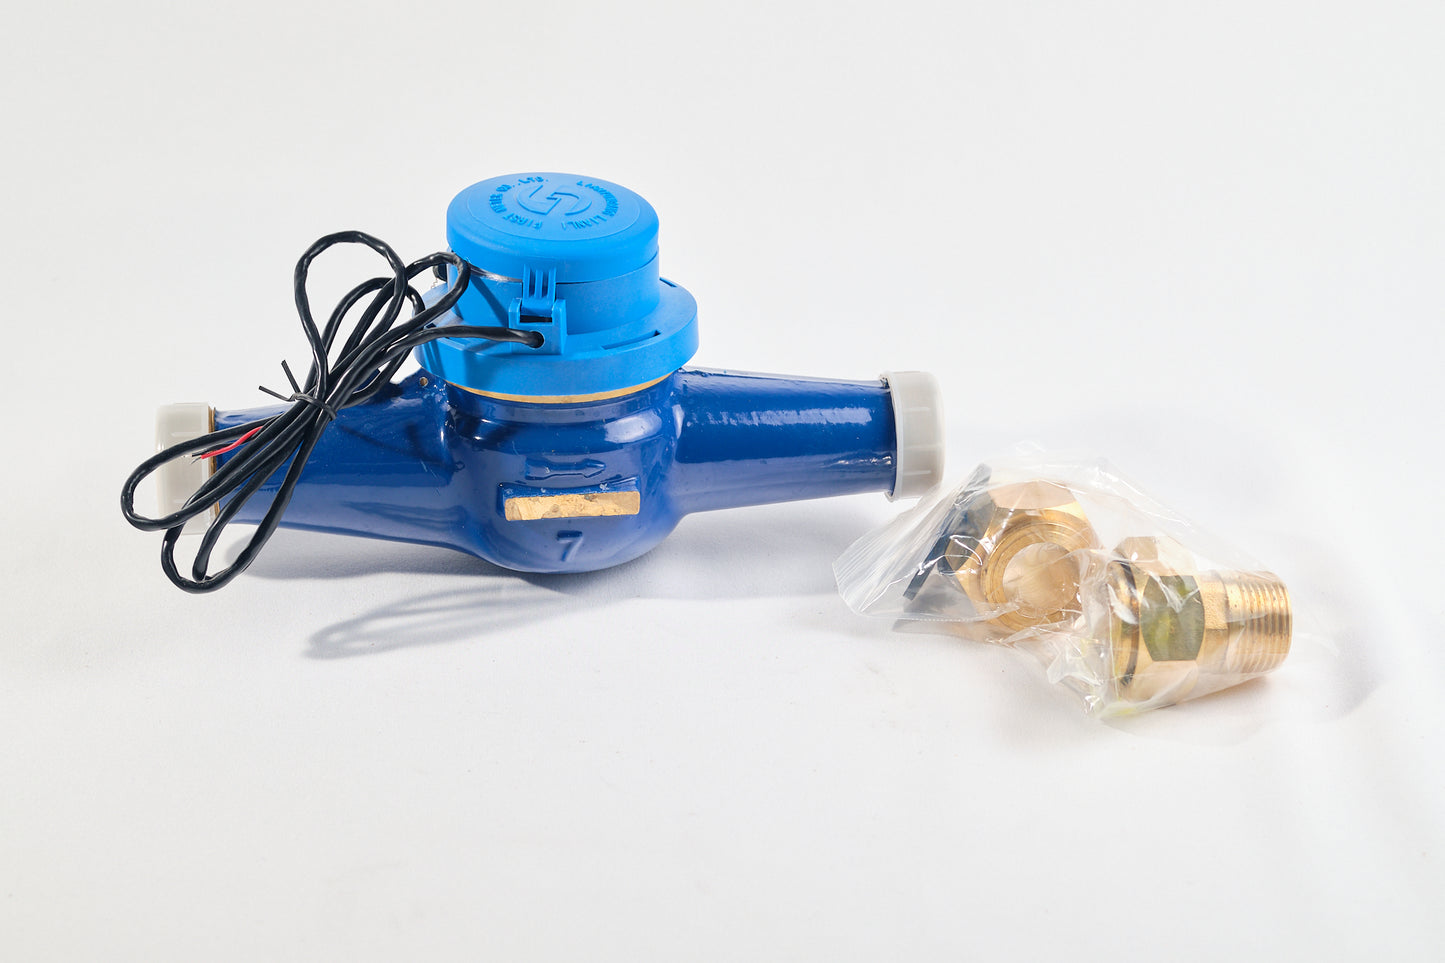 25mm Multi-Jet COLD Water Meter Fitted with 10L Pulse c/w BSP Nut & Tail